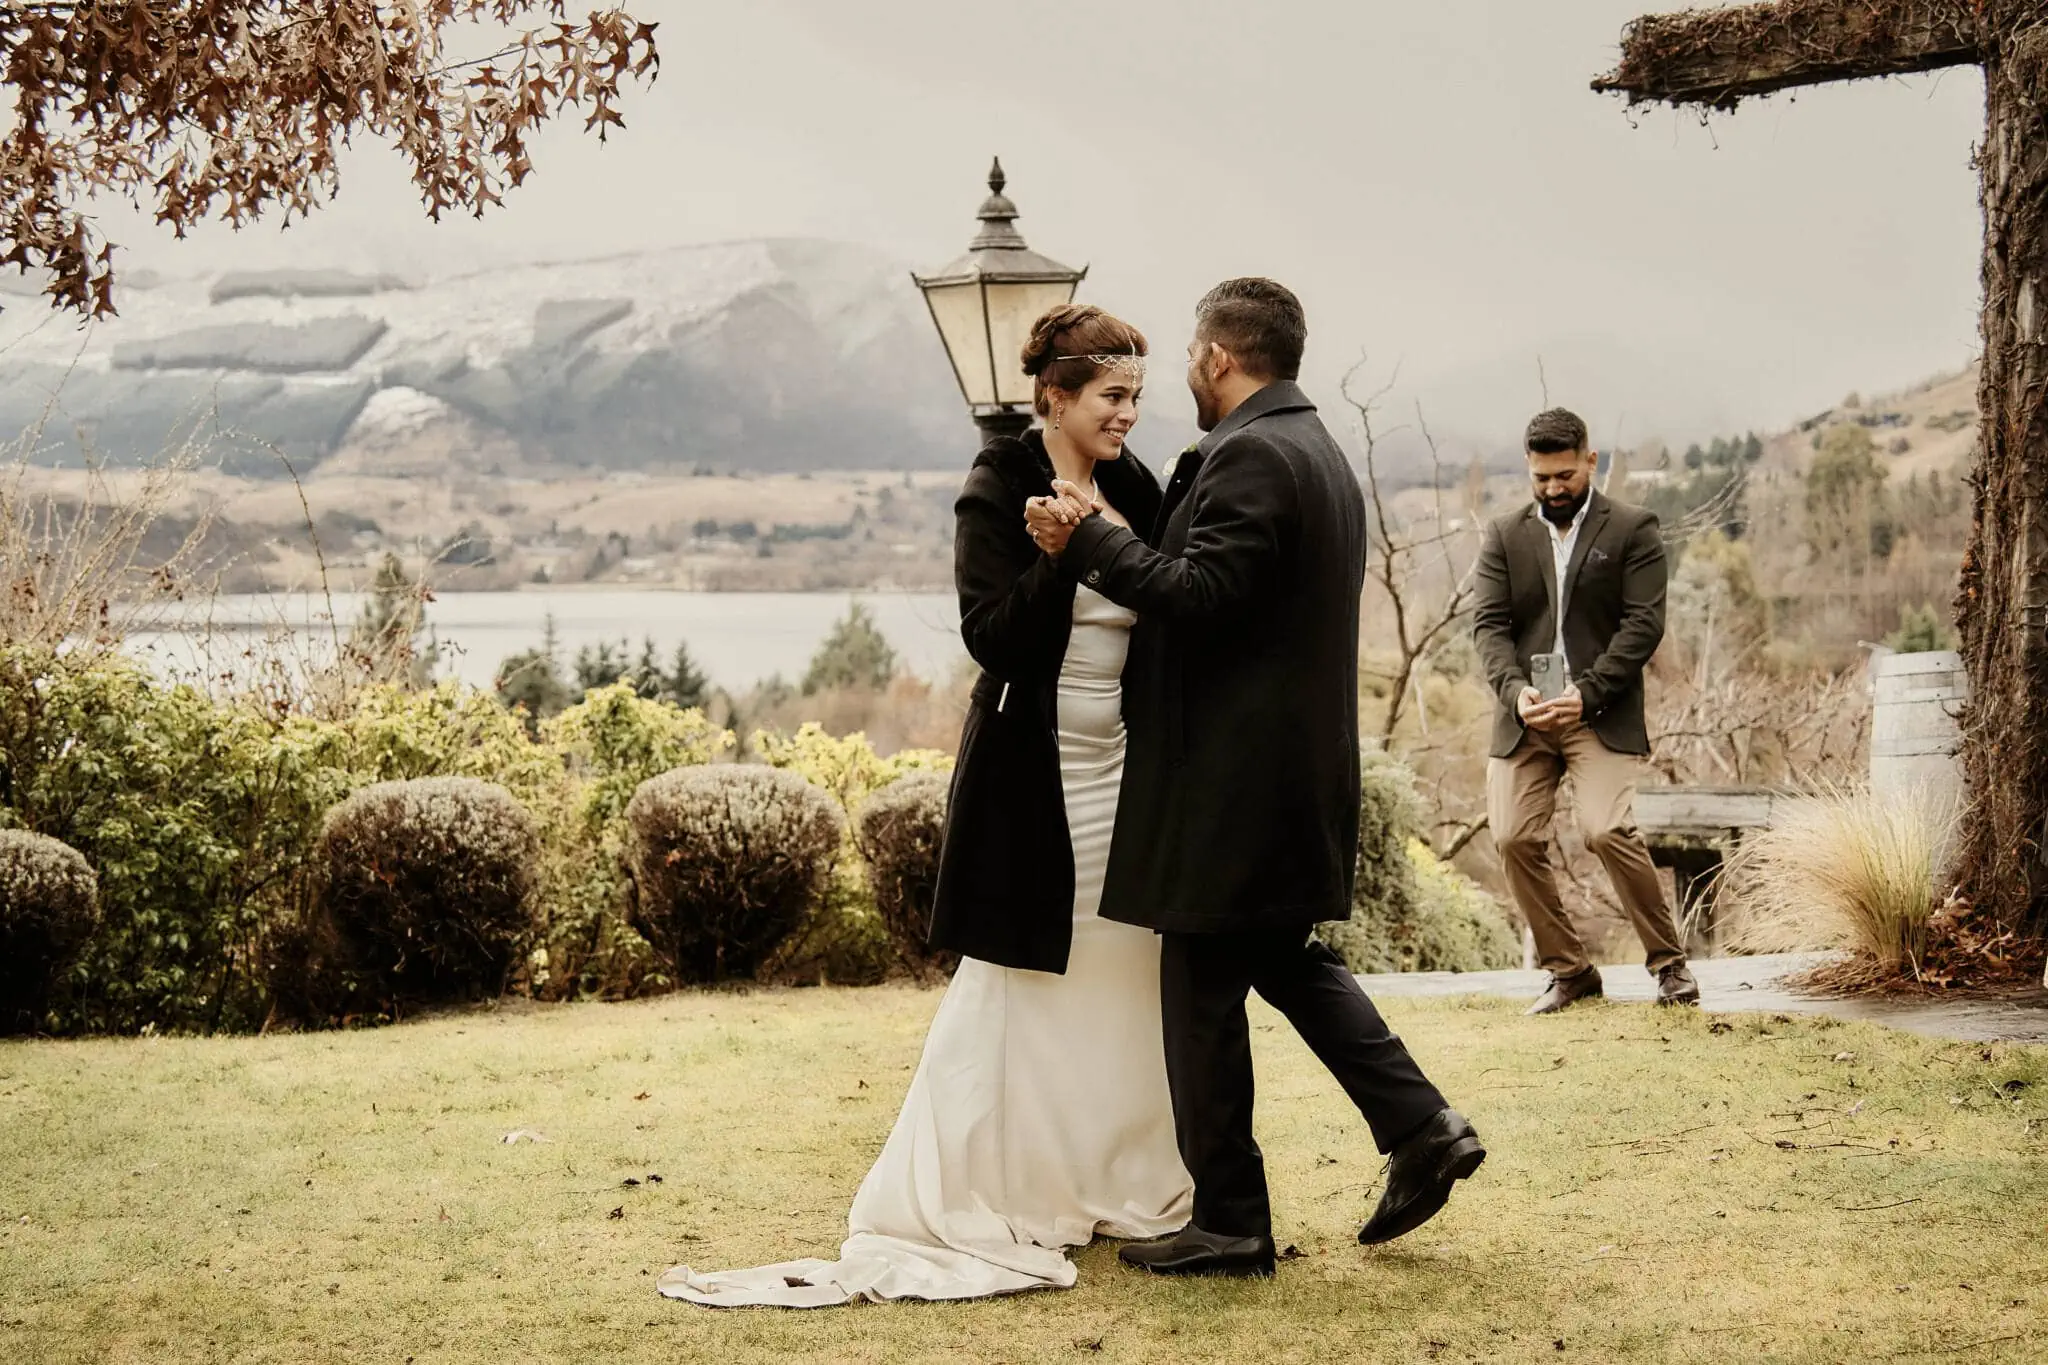 Queenstown New Zealand Elopement Wedding Photographer - The bride and groom, Wasim and Yumn, sharing a kiss during their Queenstown Islamic wedding near a lake.